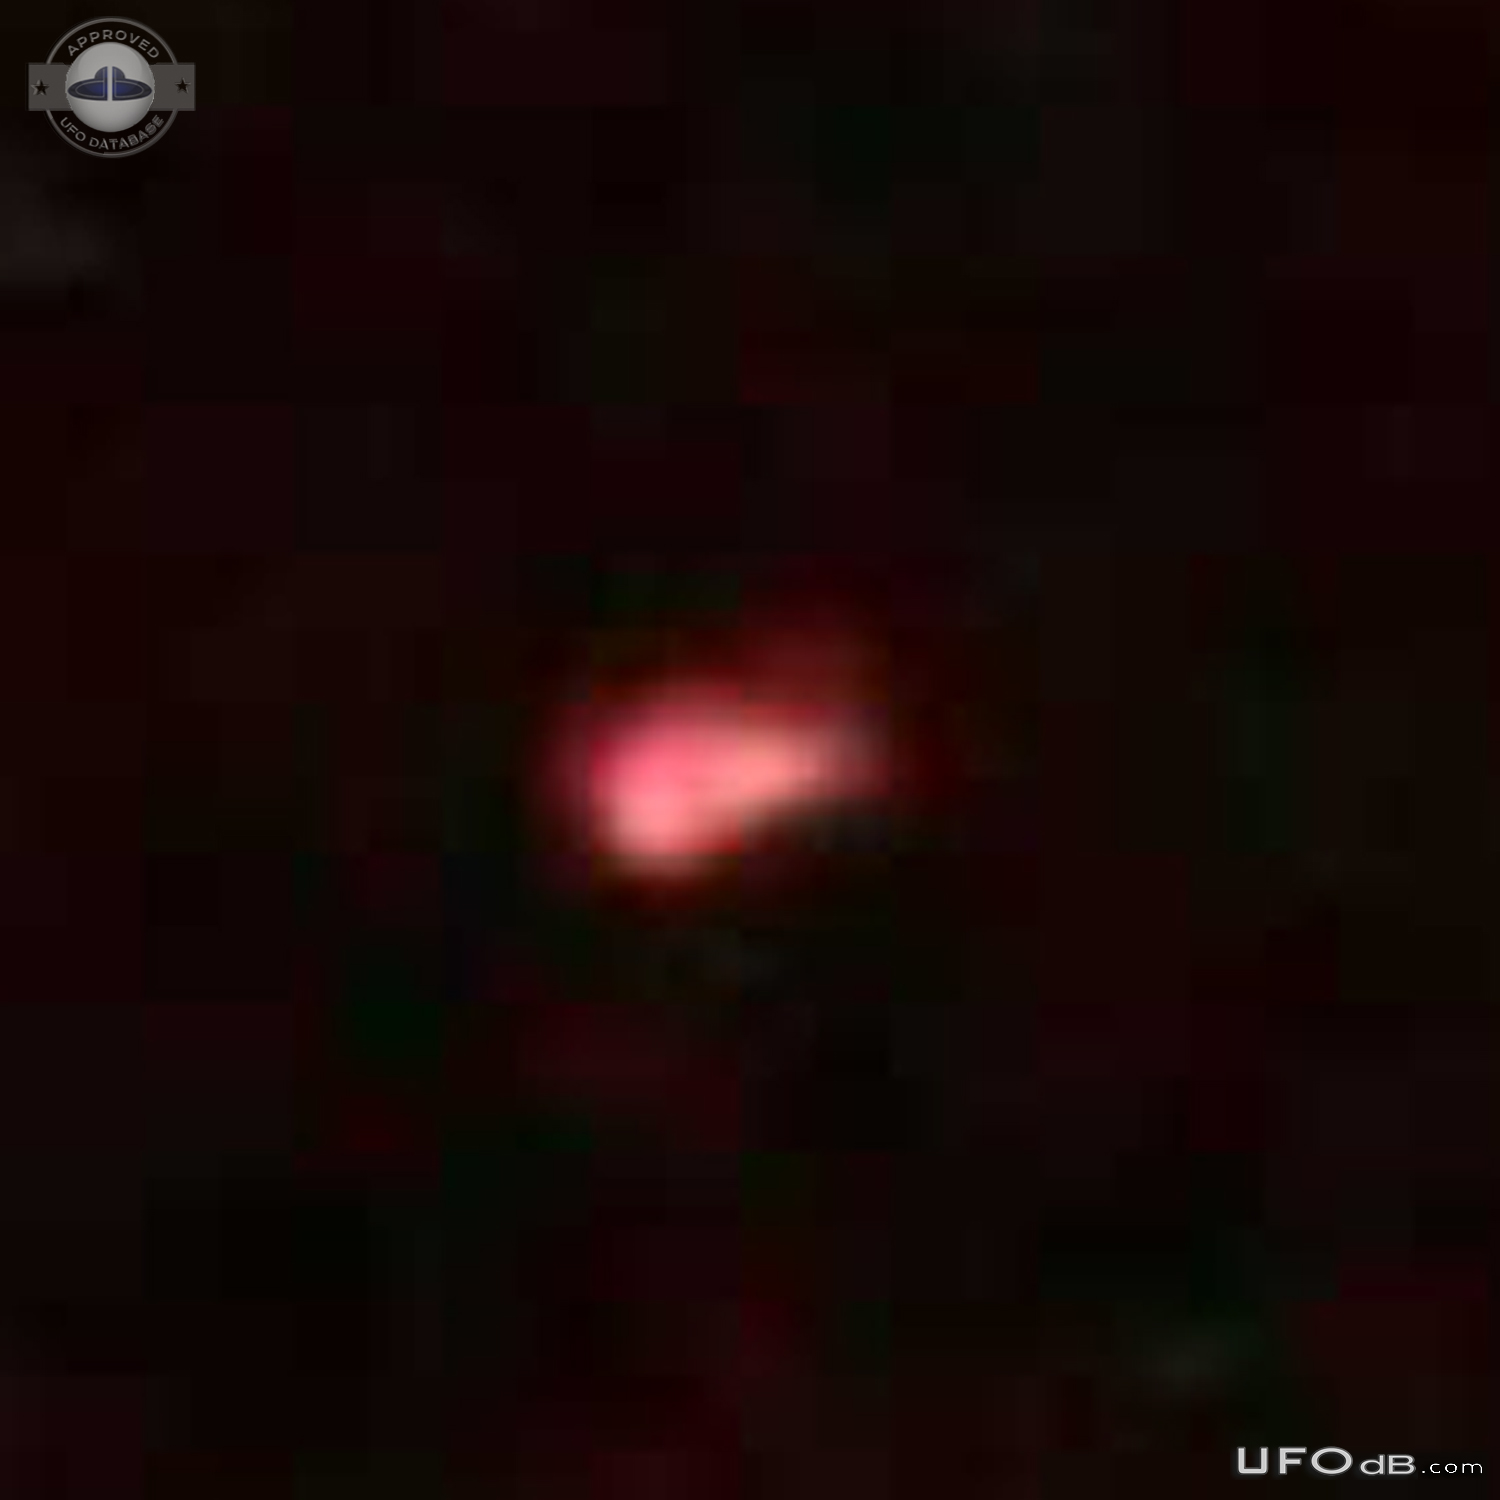 There was an orange glowing UFO in the sky - Hamilton Ontario Canada 2 UFO Picture #772-4